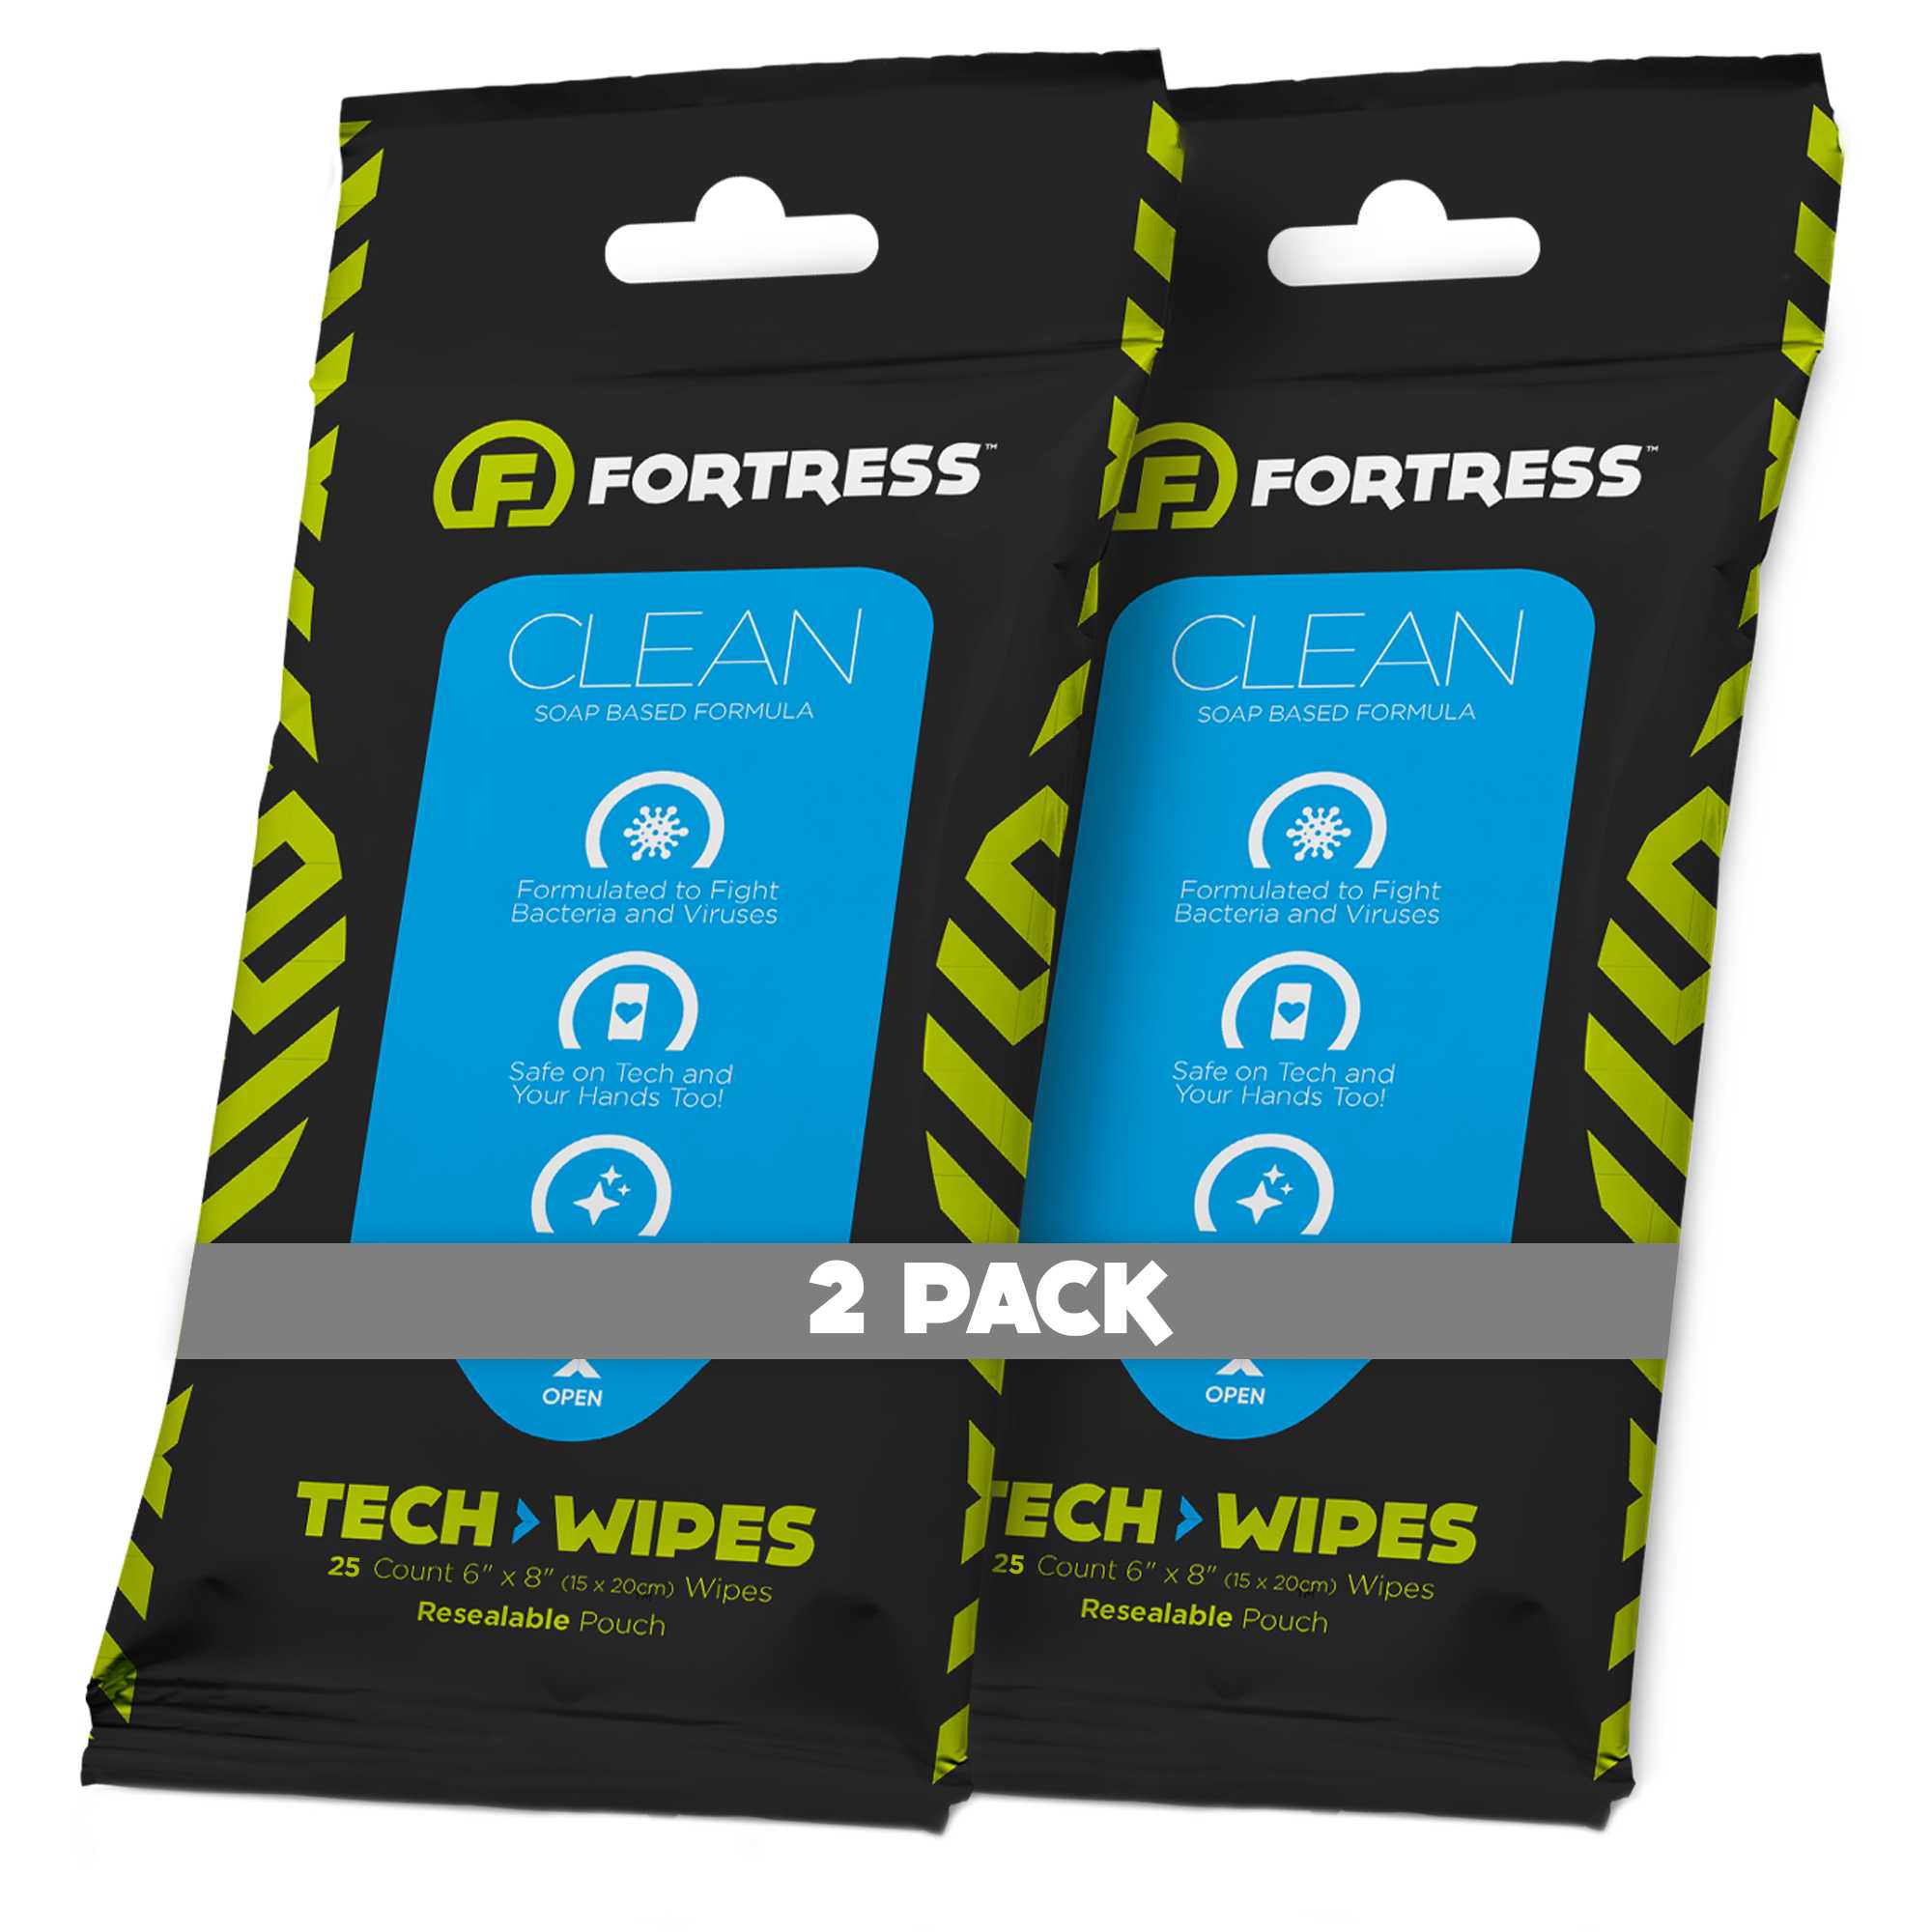 Fortress Tech Wipes (25 ct.) To-Go Disinfecting Wipes for Smartphones 2-PackNo Scooch Clean